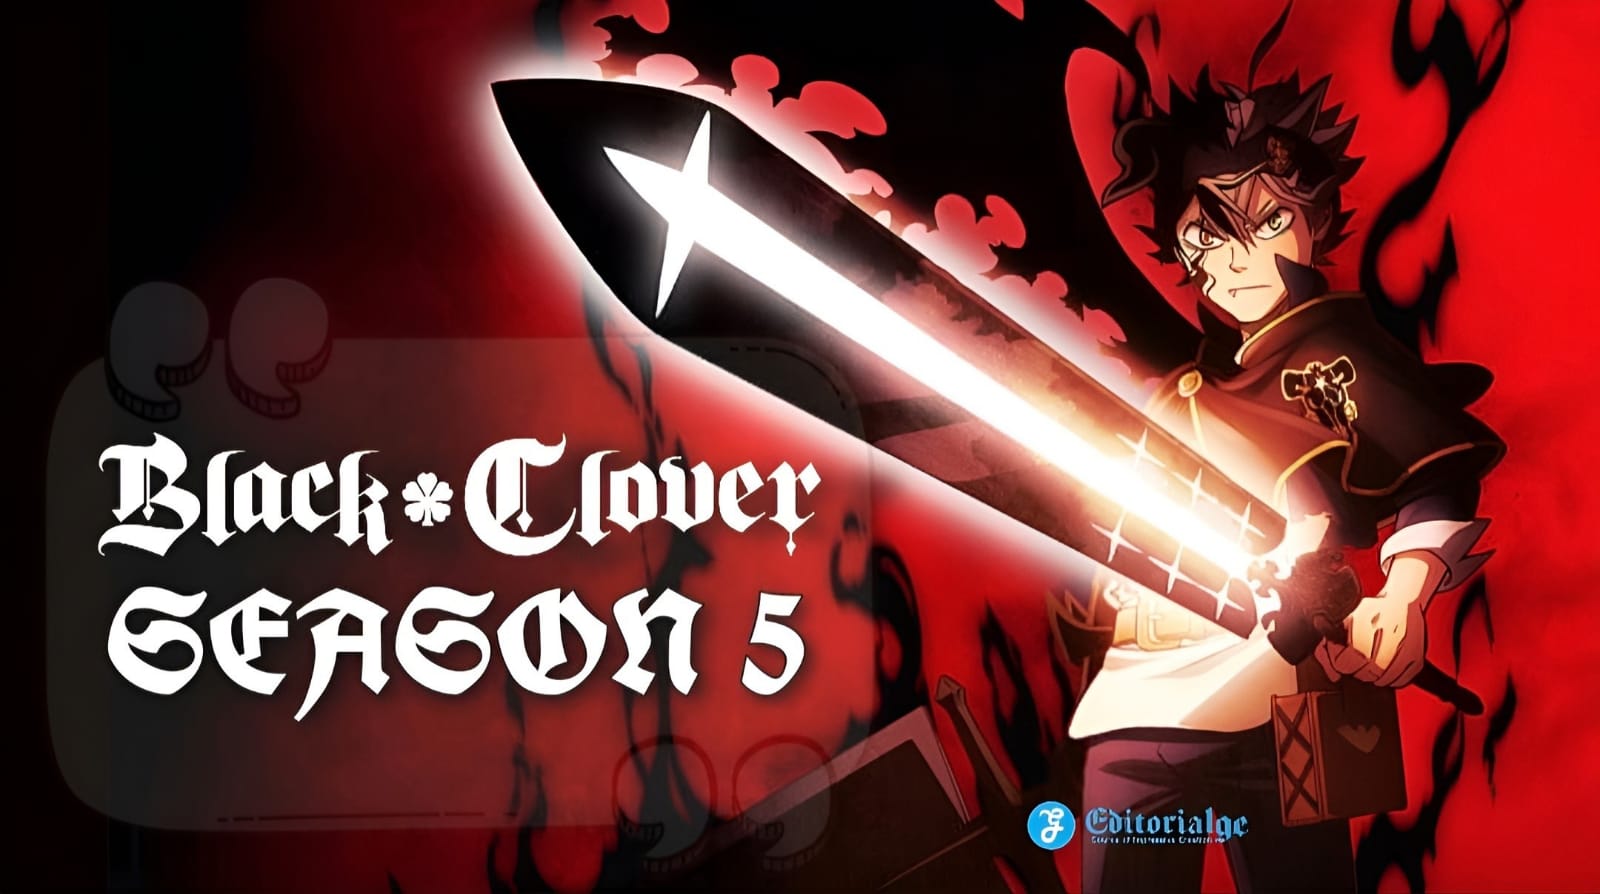 Black Clover Season 5 Everything You Need To Know